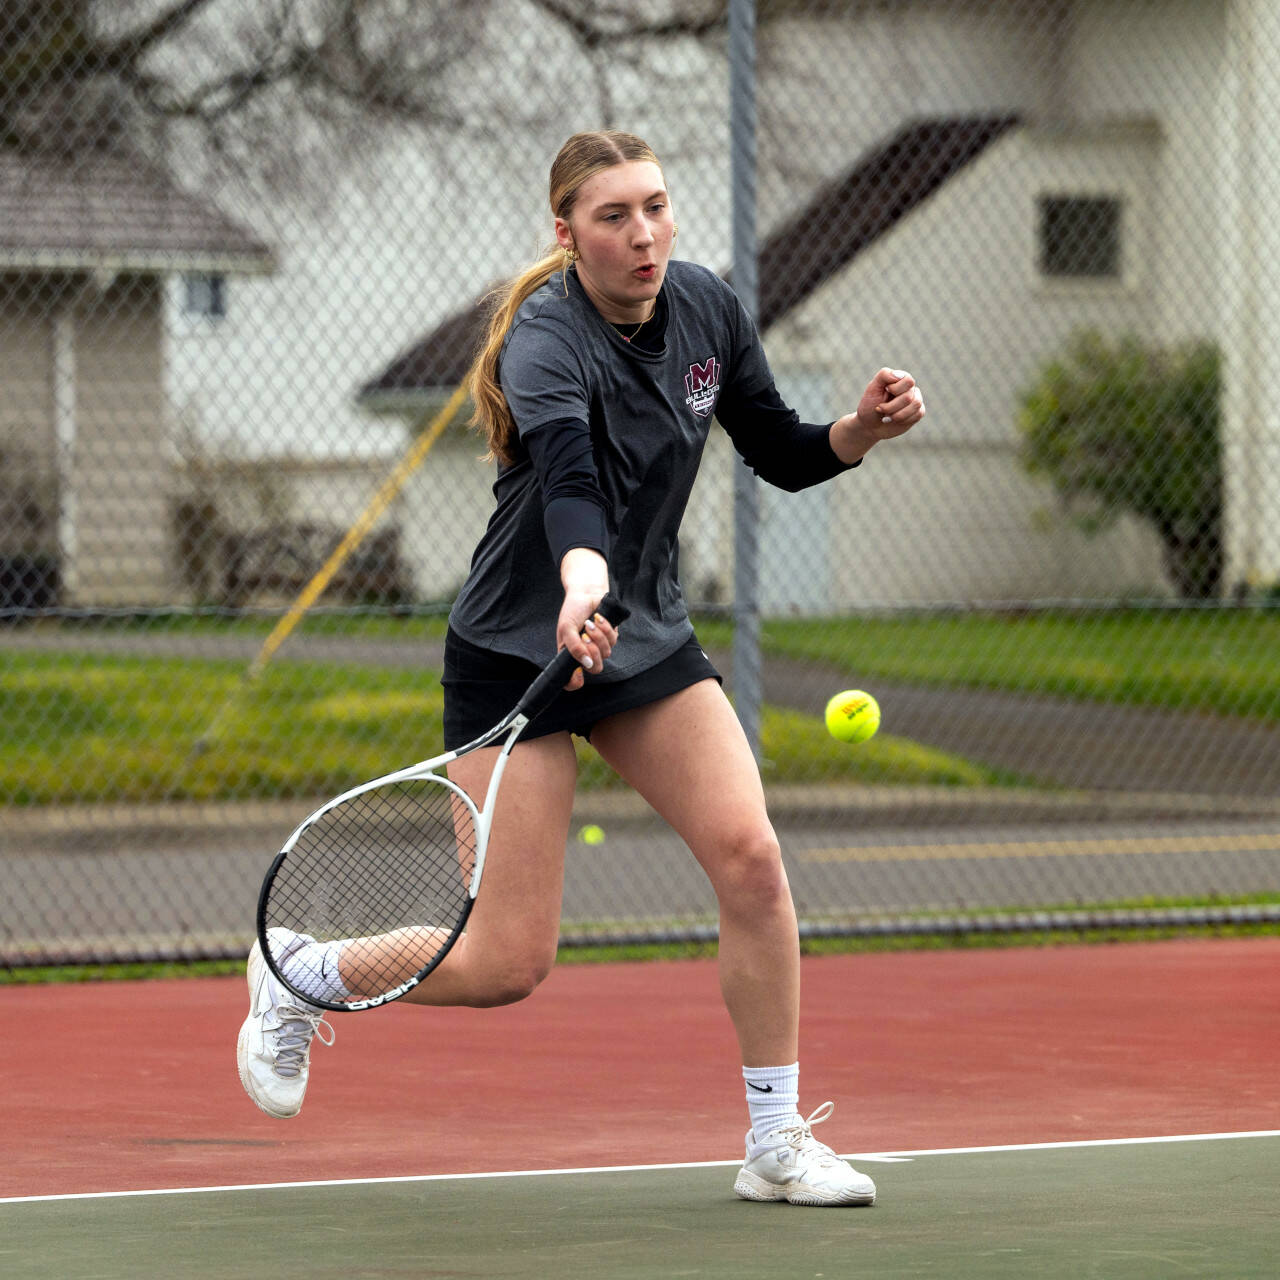 PHOTO BY FOREST WORGUM Montesano’s Karissa Otterstetter hits a forehand shot during a singles victory against Stevenson on Tuesday in Montesano.